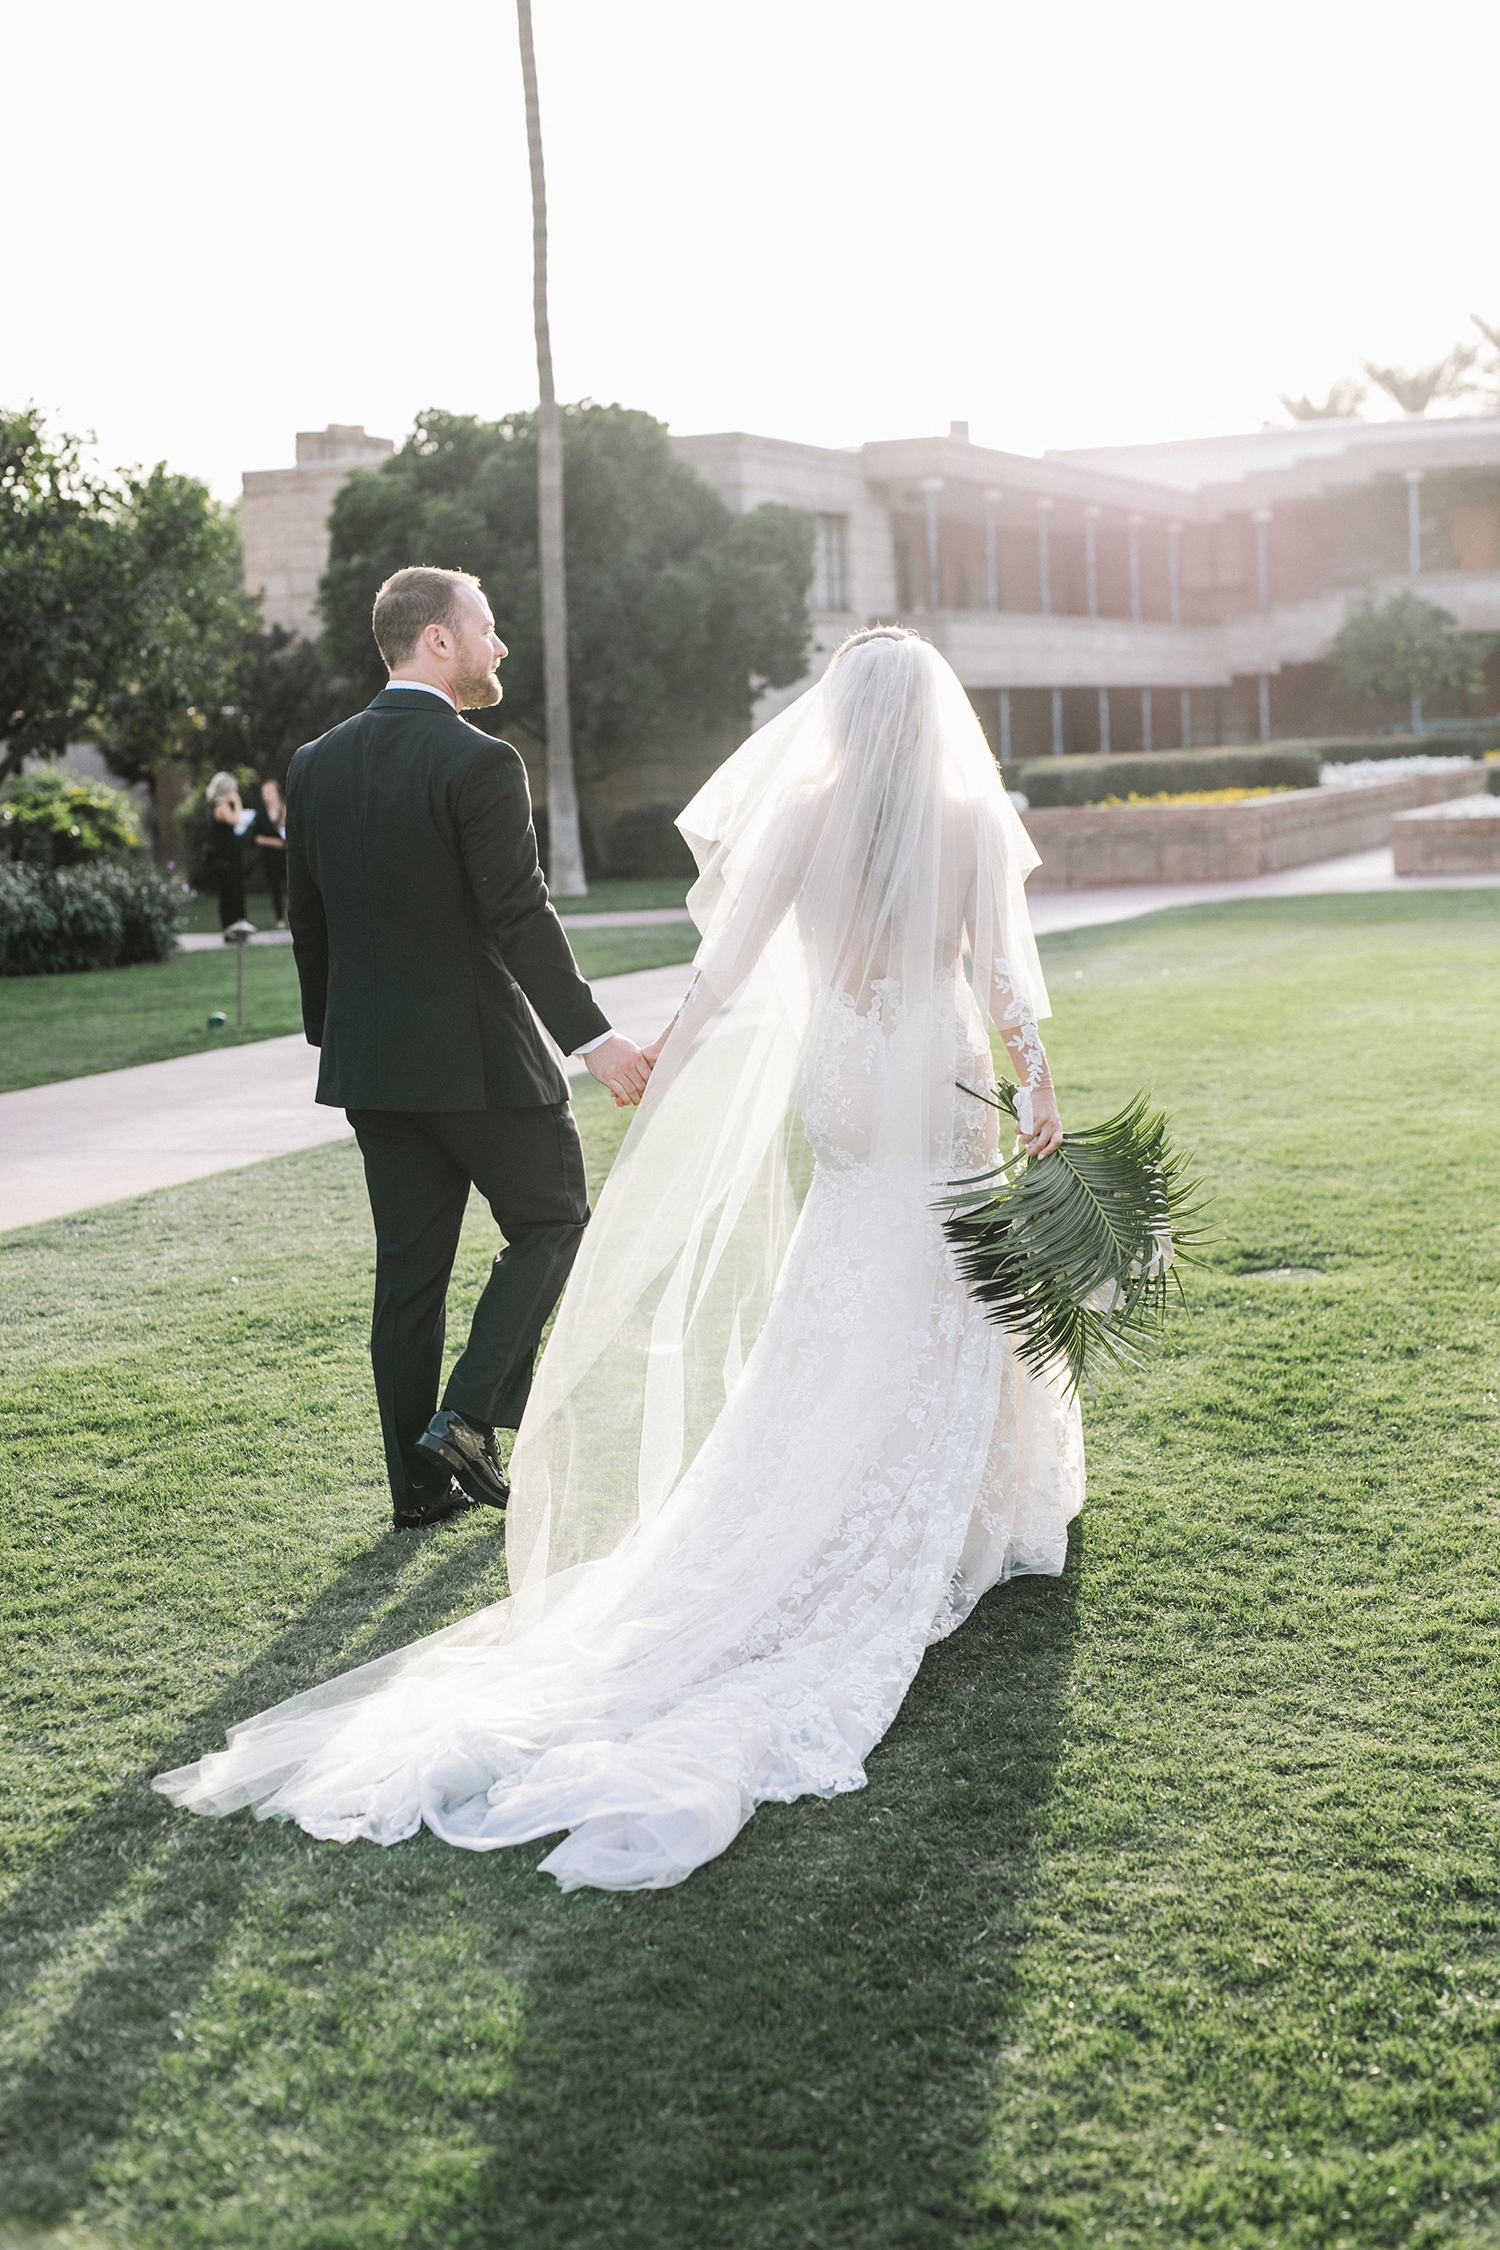 Jen and Will's stunning Arizona wedding at The Arizona Biltmore. Planning by Andrea Leslie, florals by Form Floral, bride's dress is Galia Lahav, hair by Chelsea Sprinkle, makeup by Ashley Doran, wedding stationary by Idieh Design, linens by Latavola Linen, and entertainment by Lucky Devils Band. Catch it all now on the blog! #ArizonaWeddingPhotographer #WeddingPhotographyInspiration #WeddingStylingIdeas #ArizonaWeddingIdeas #ArizonaWeddingPhotography #WeddingIdeas #WeddingDecorations #WeddingDress #ArizonaWedding #ArizonaPhotographer #ArizonaBiltmore